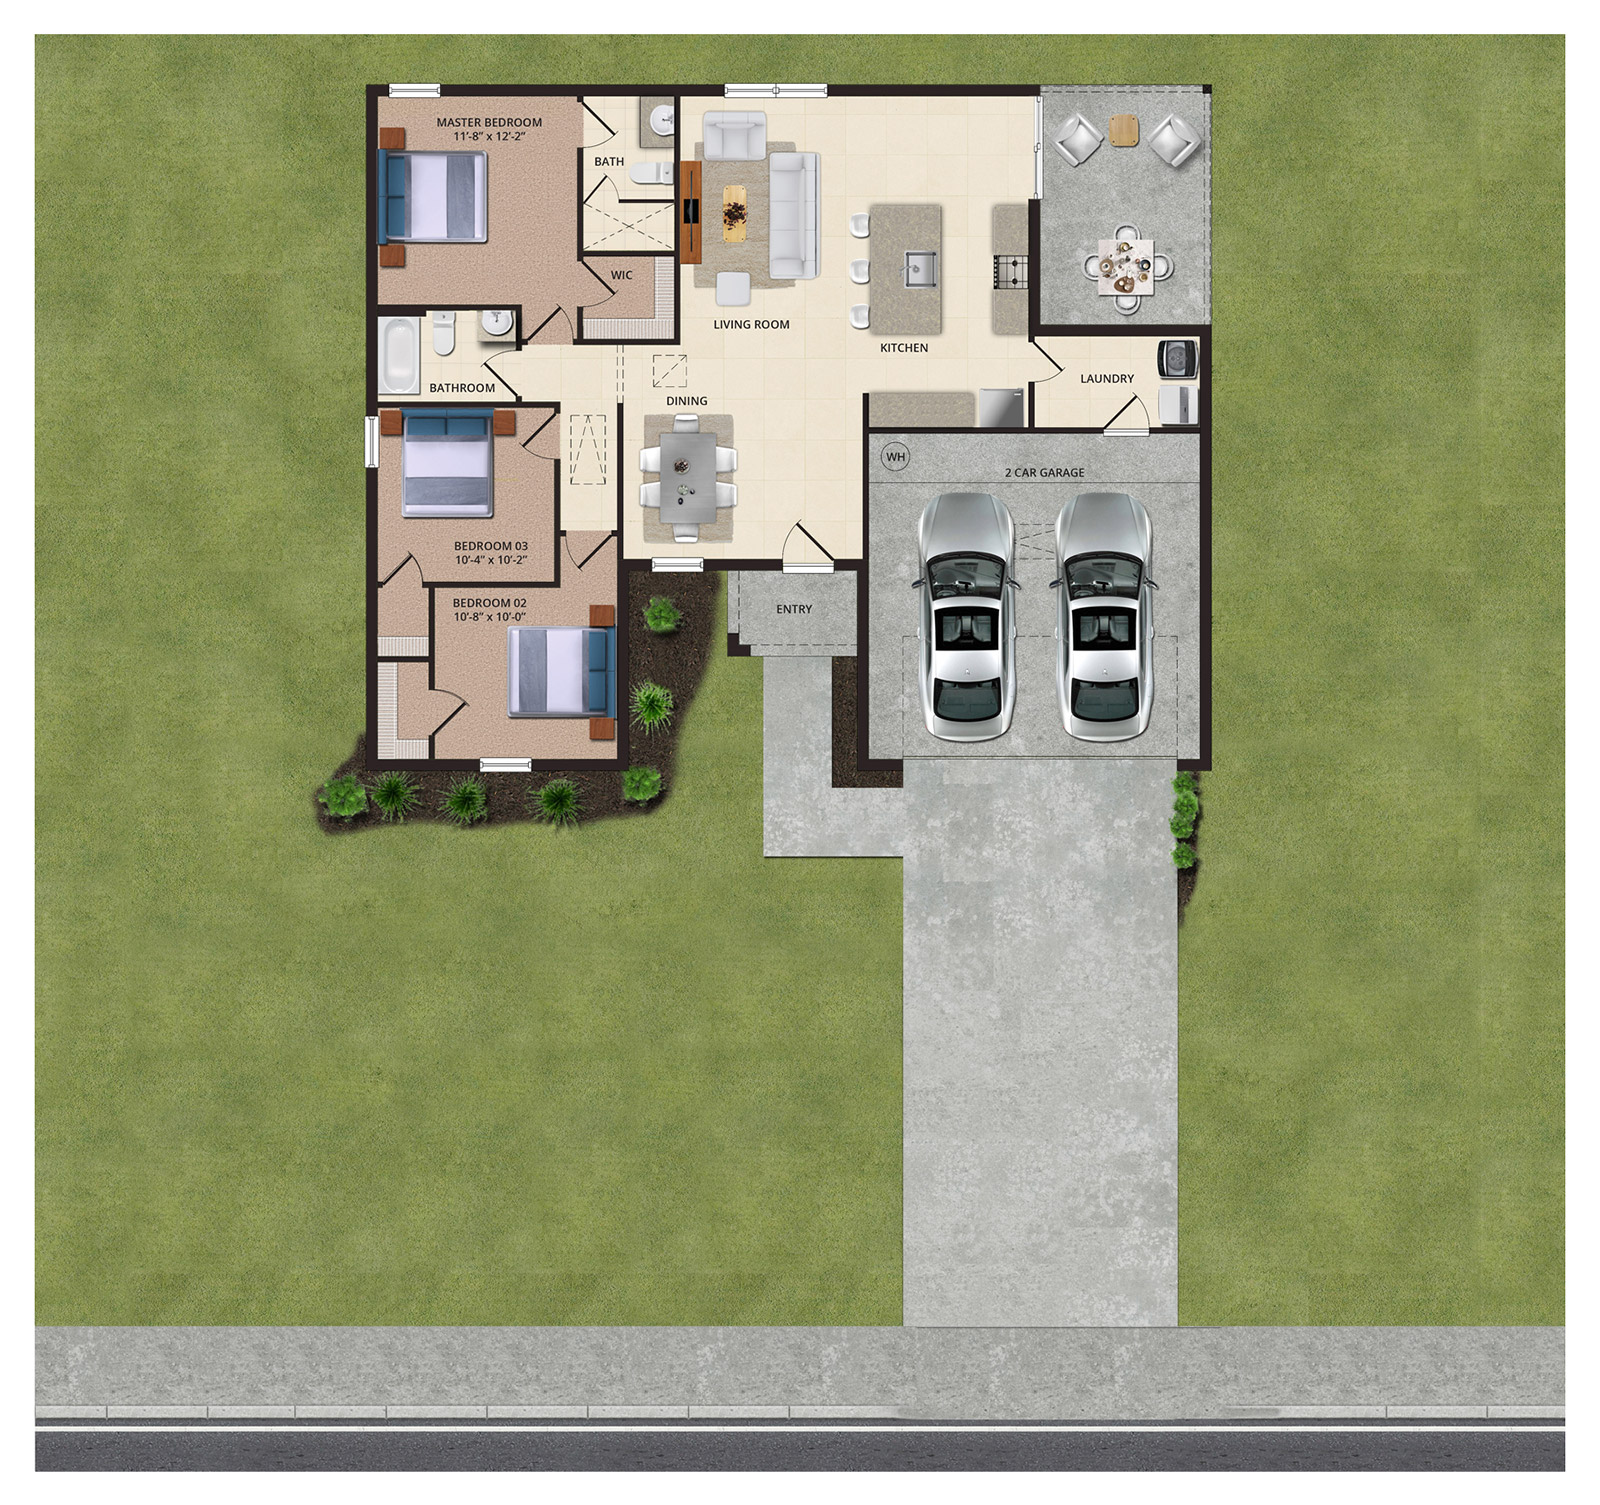 EcoSun-Homes-Floor-Plan-Light-Box-Images-Expanded-View-1600x1505-1251B-Crema